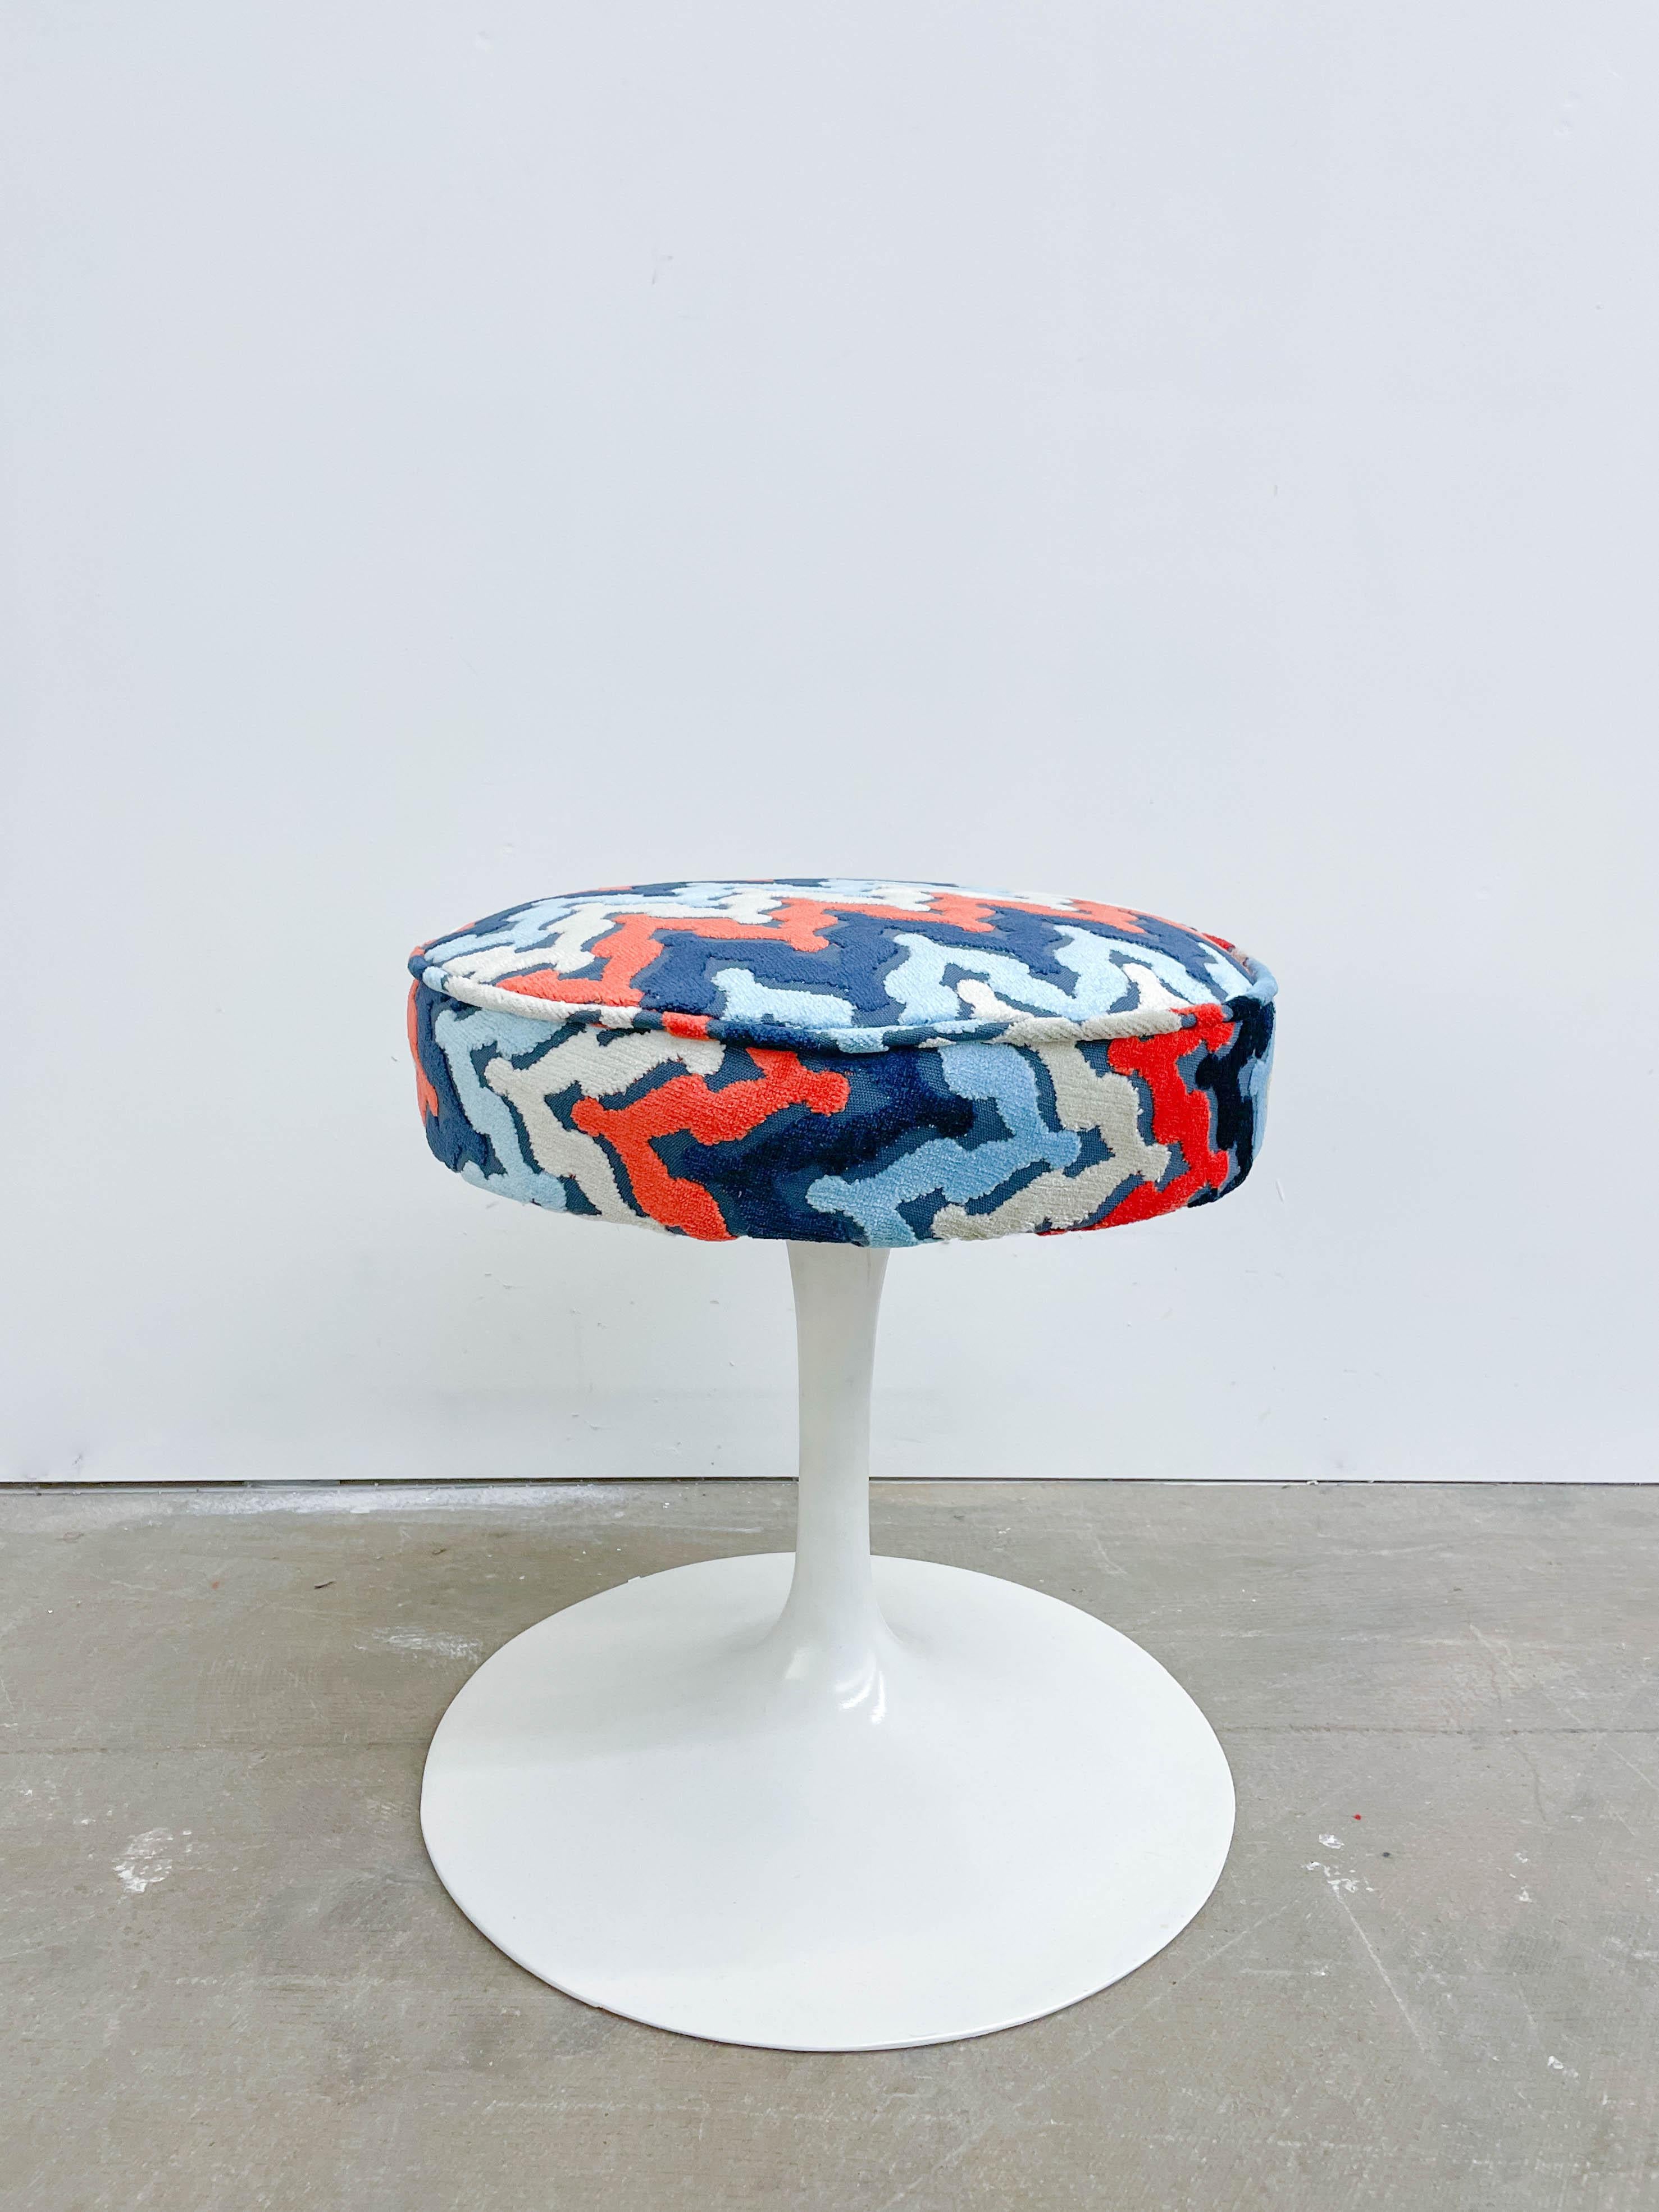 This is a beautiful vintage Eero Saarinen-designed spinning stool newly upholstered in a cut velvet fabric by Michael Jon Designs titled 'Jacquard'. The metal base has the BR 51 stamp found on all authentic Knoll production of this design. This